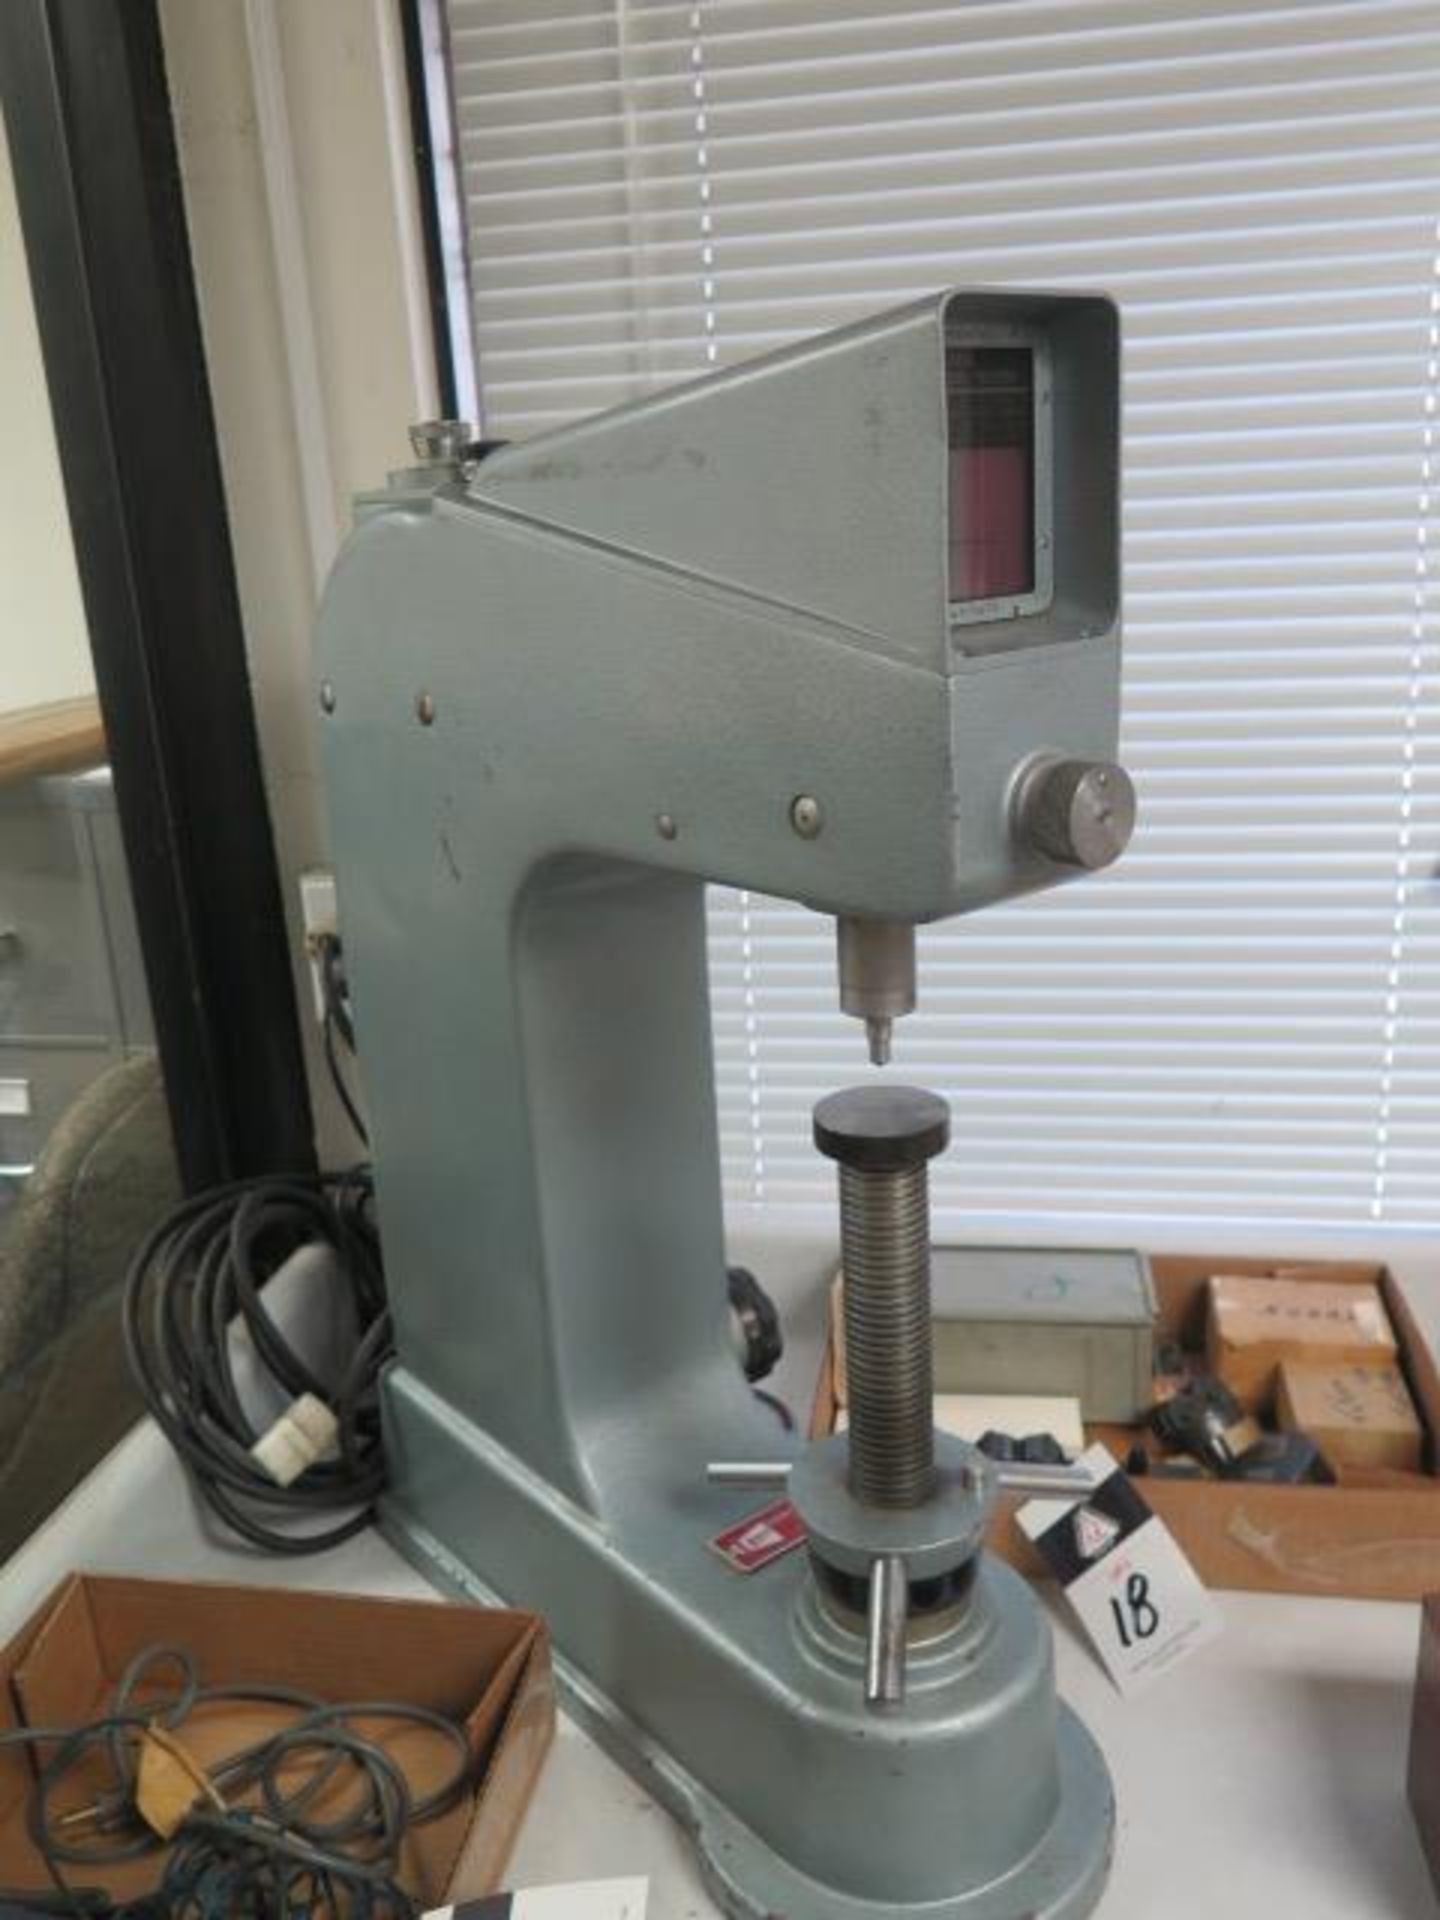 TMI Hardness Tester s/n 105876 w/ Accessories (SOLD AS-IS - NO WARRANTY) - Image 3 of 9